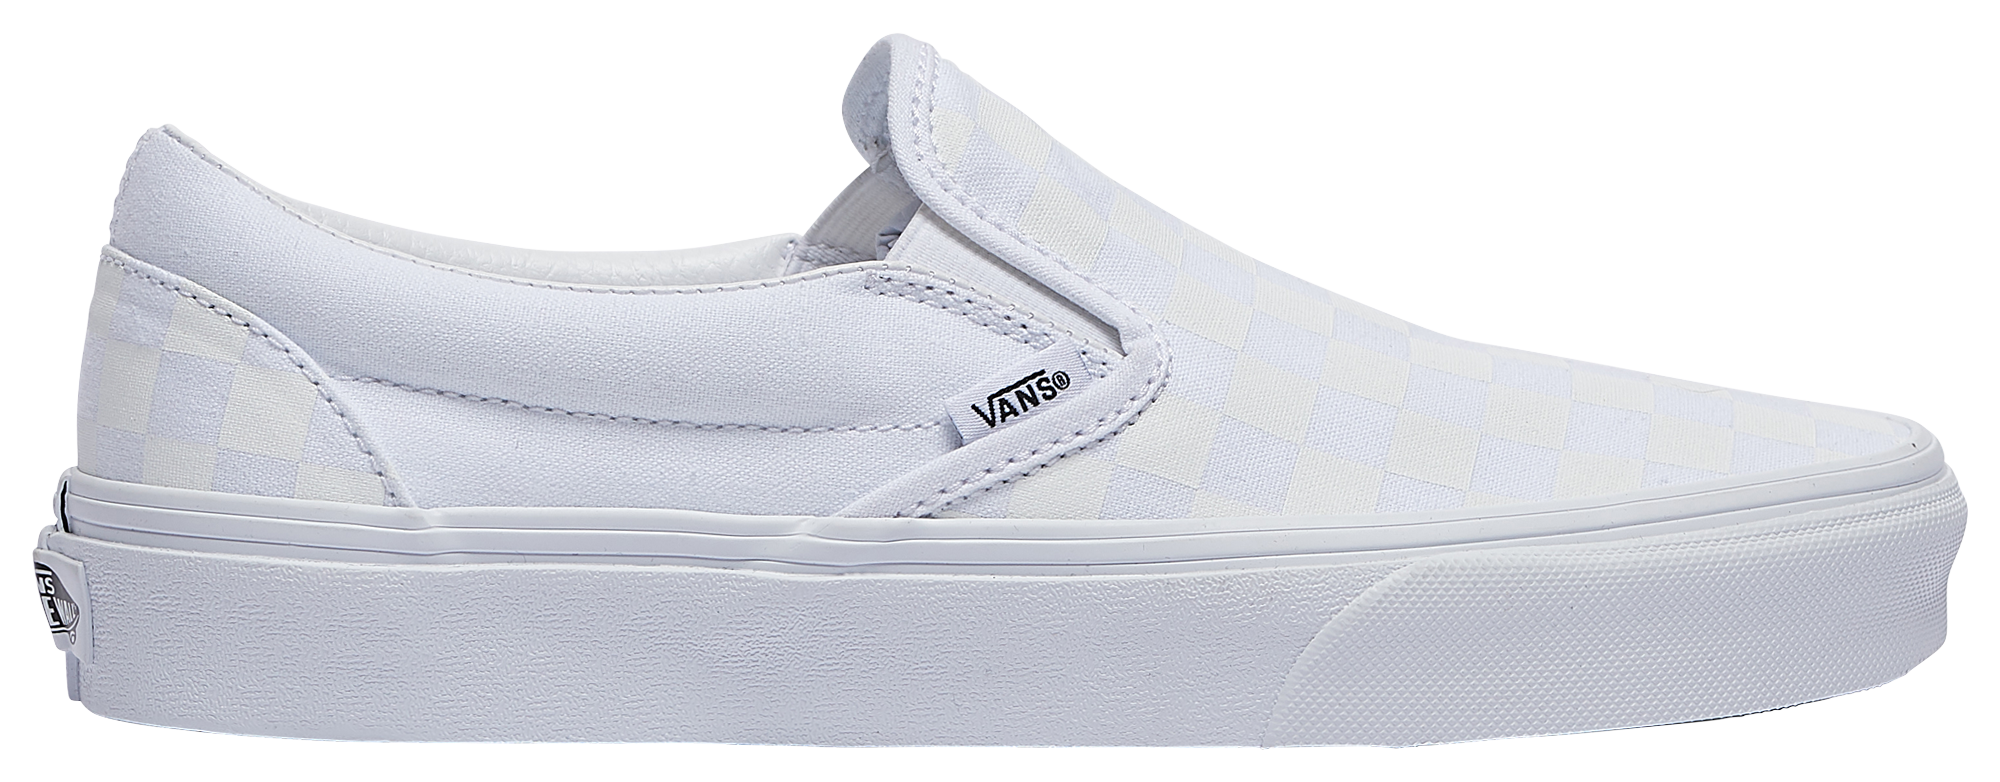 Vans Checkerboard Classic Slip On | Champs Sports